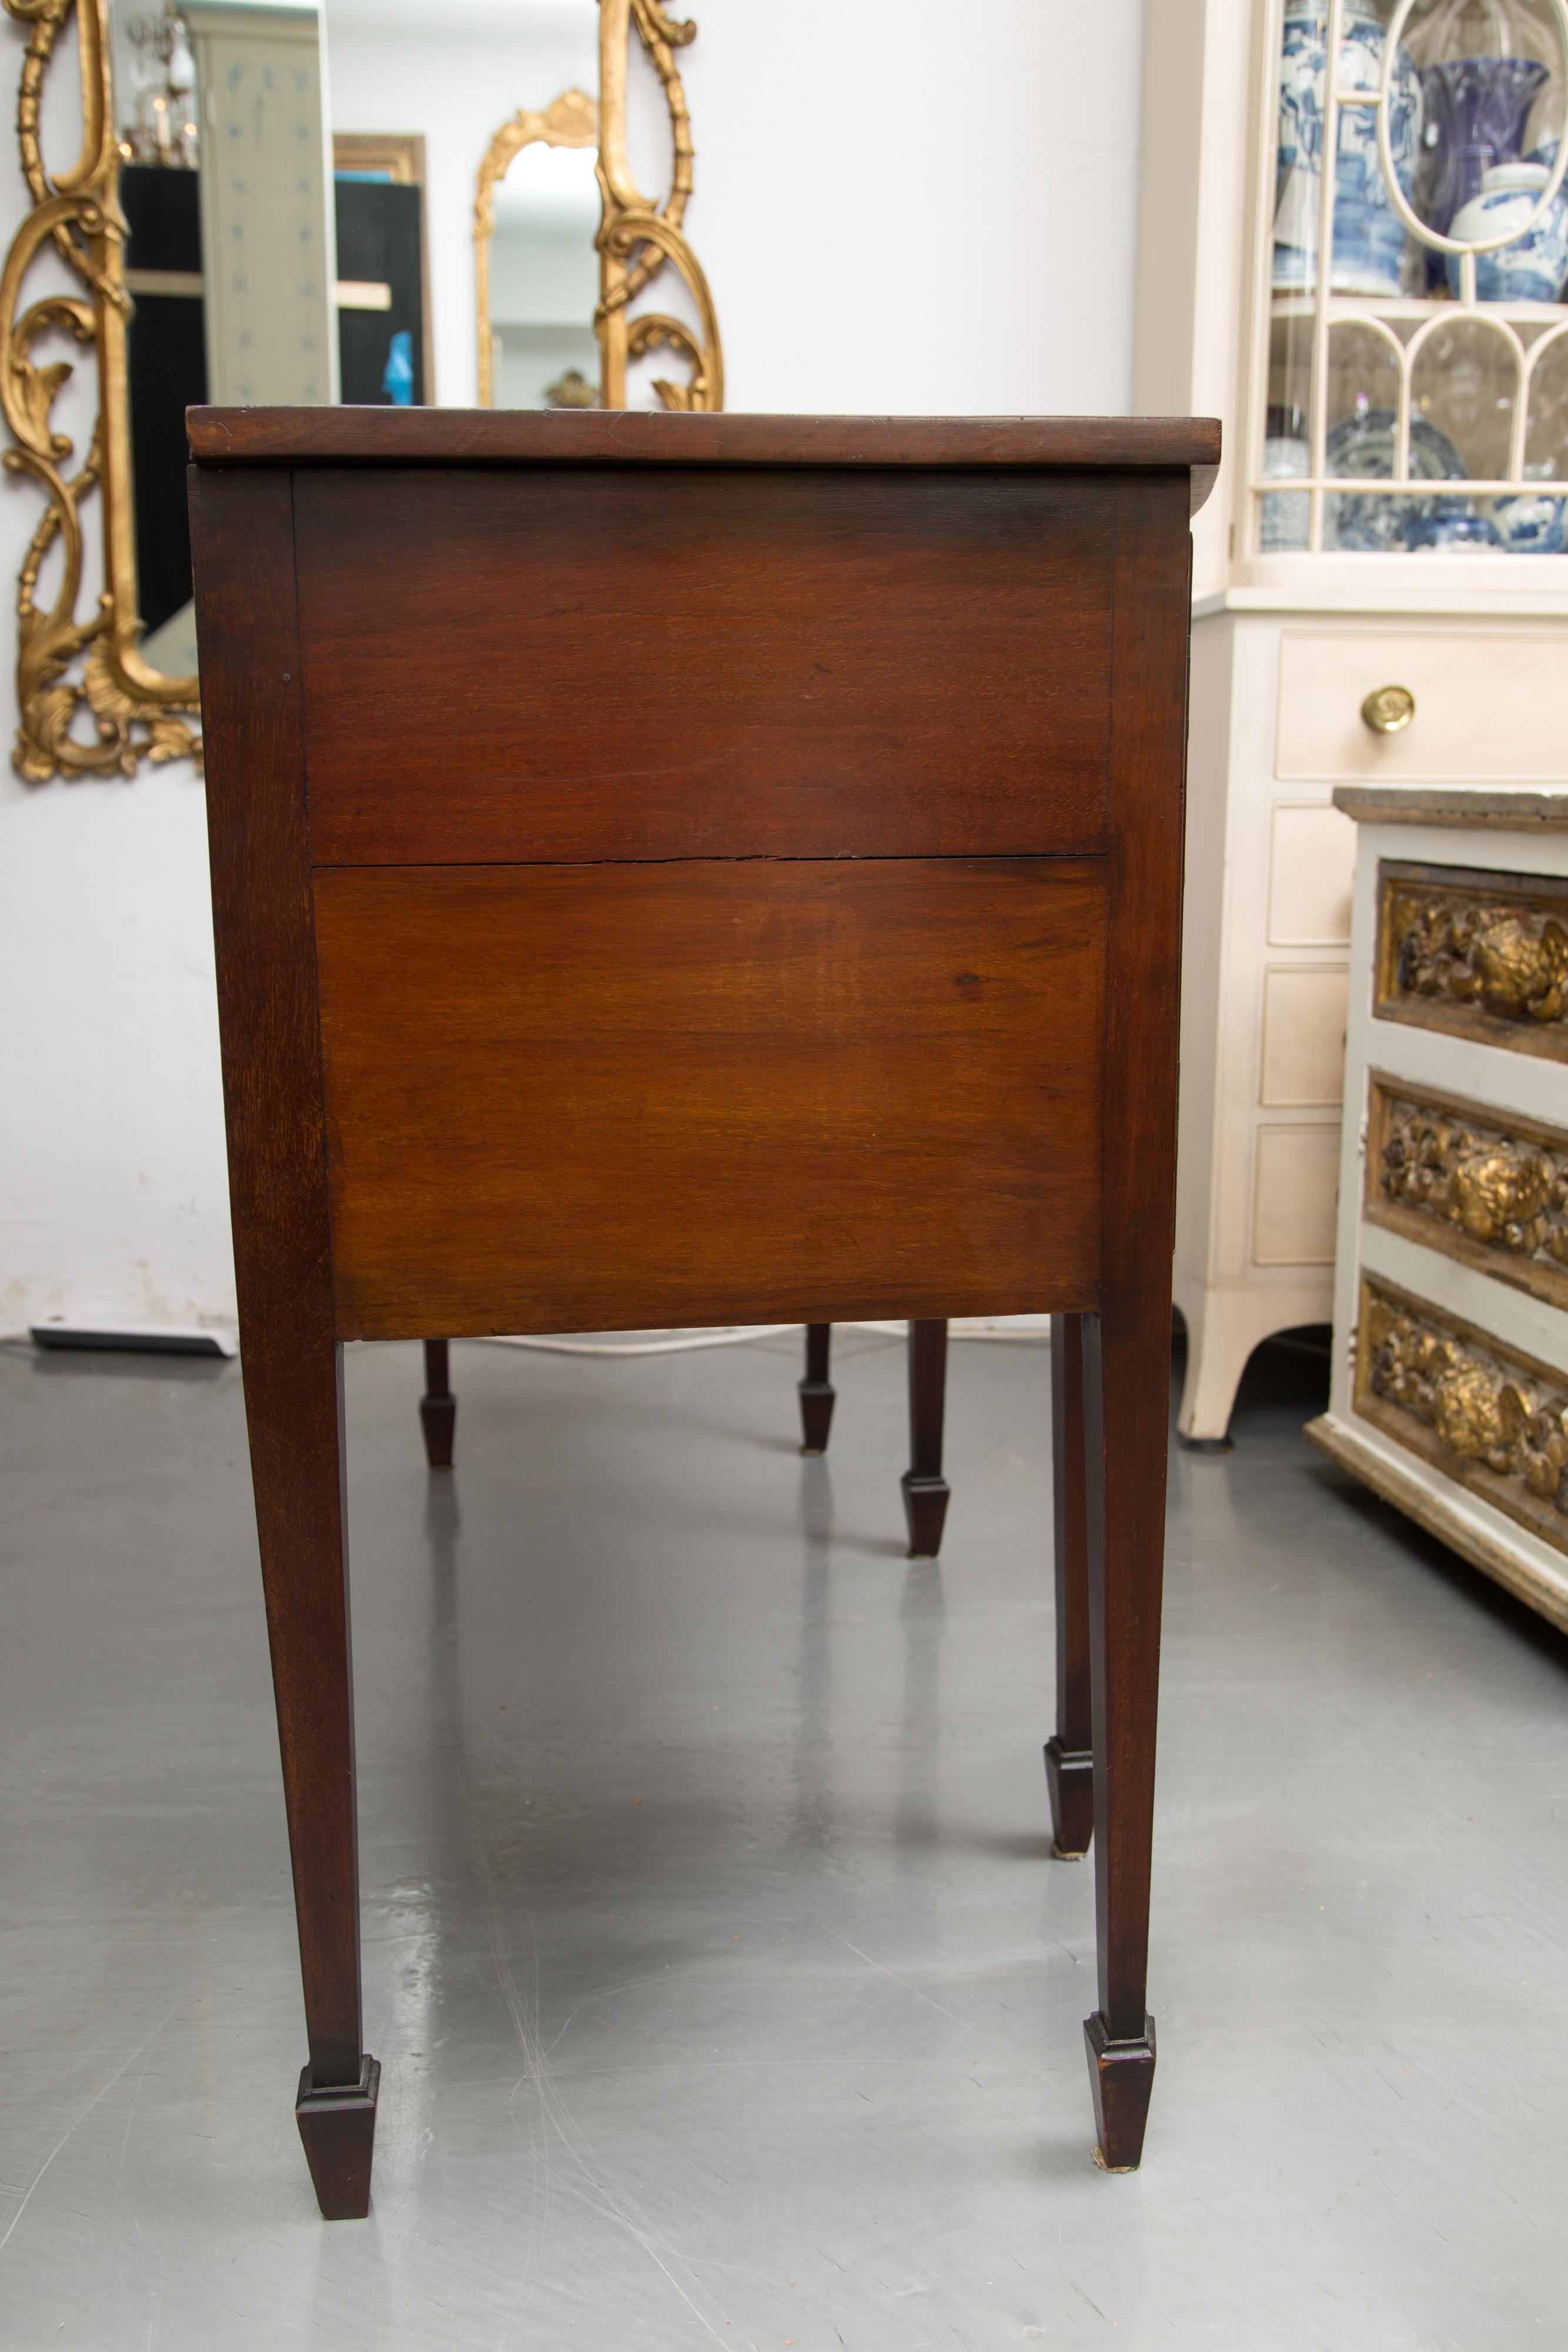 This is a Classic English George III mahogany bow front sideboard. The top with straight edge is over a conforming case containing a central drawer flanked by a pair of cabinet doors. The case piece is supported by straight tapered legs terminating